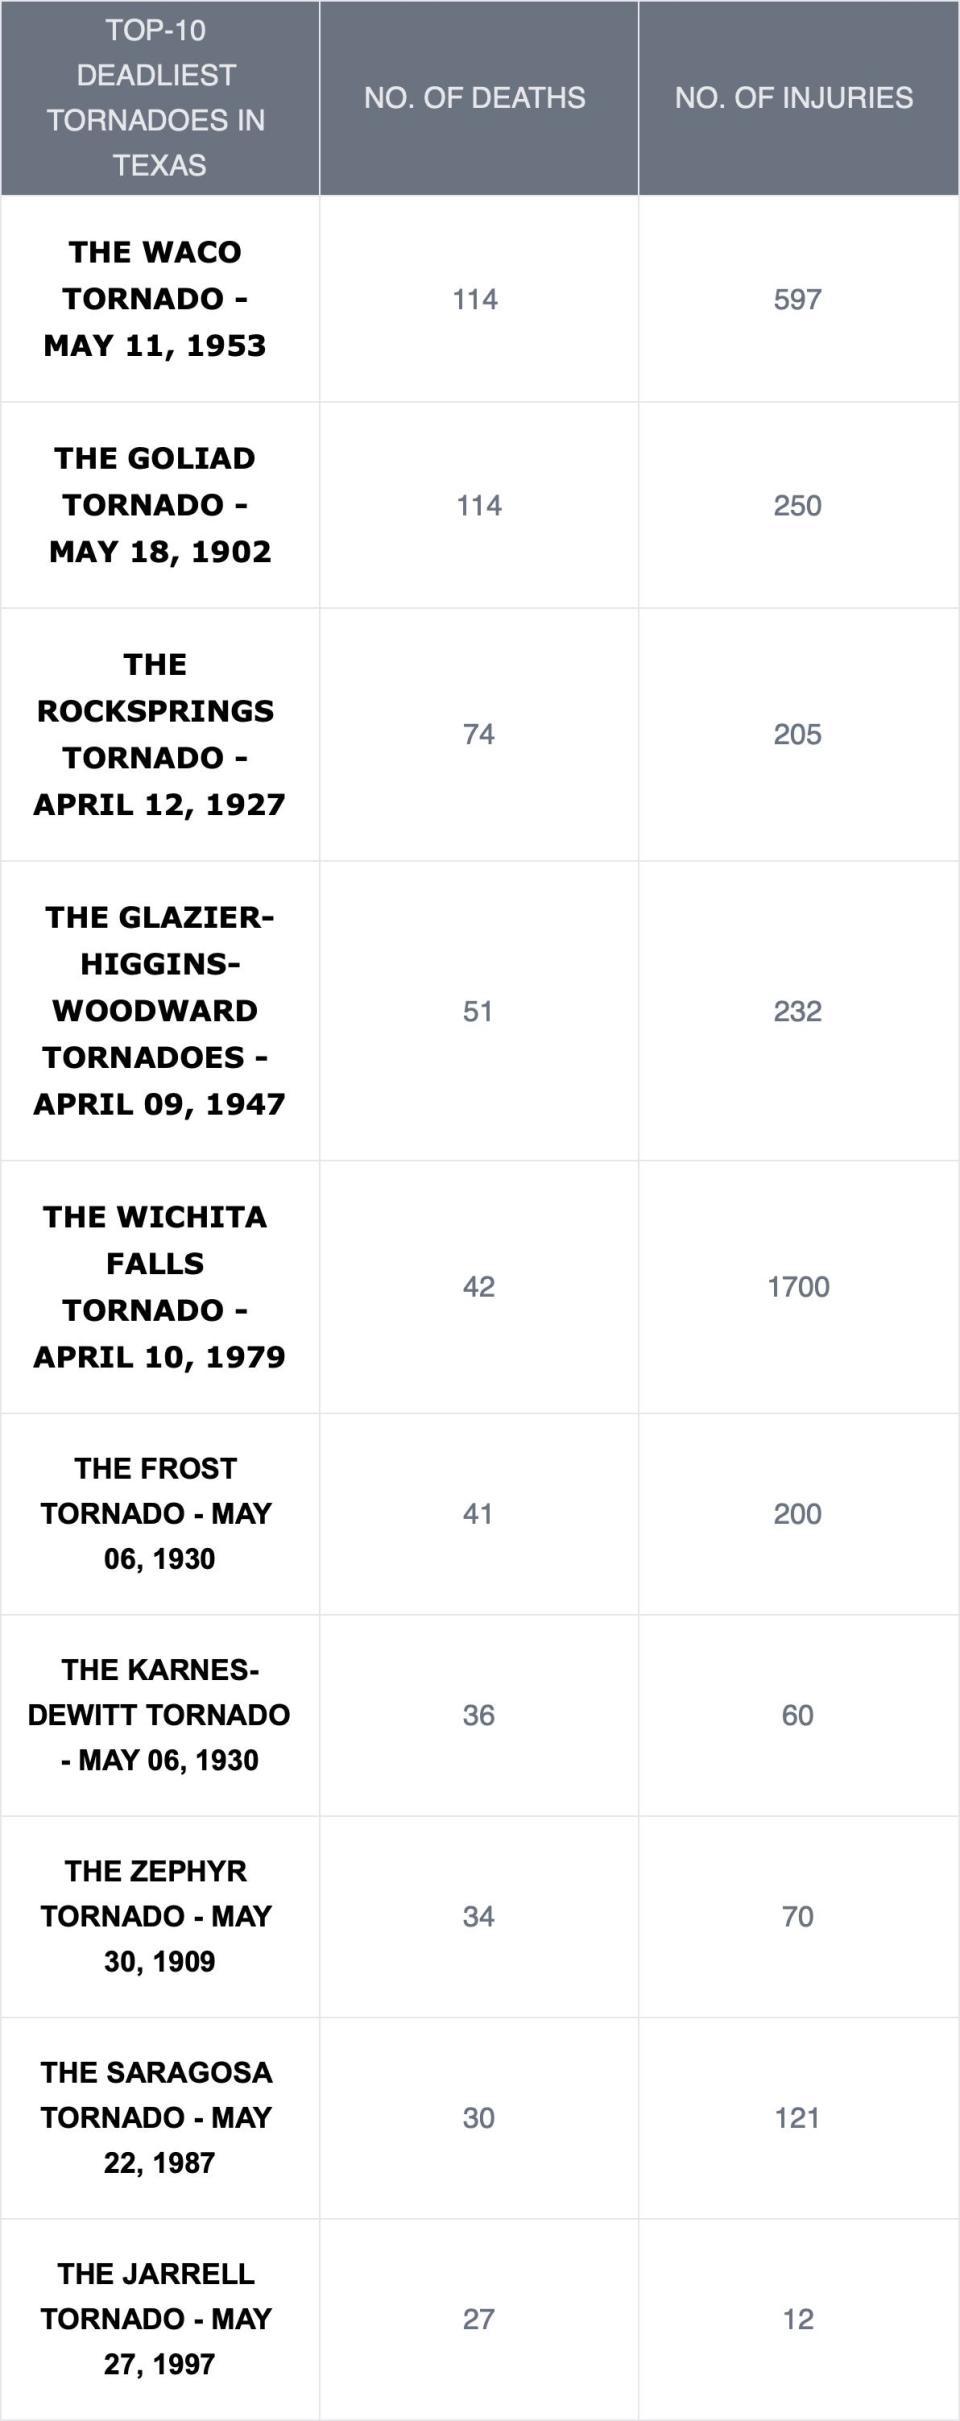 A list of the top 10 worst tornadoes in Texas history